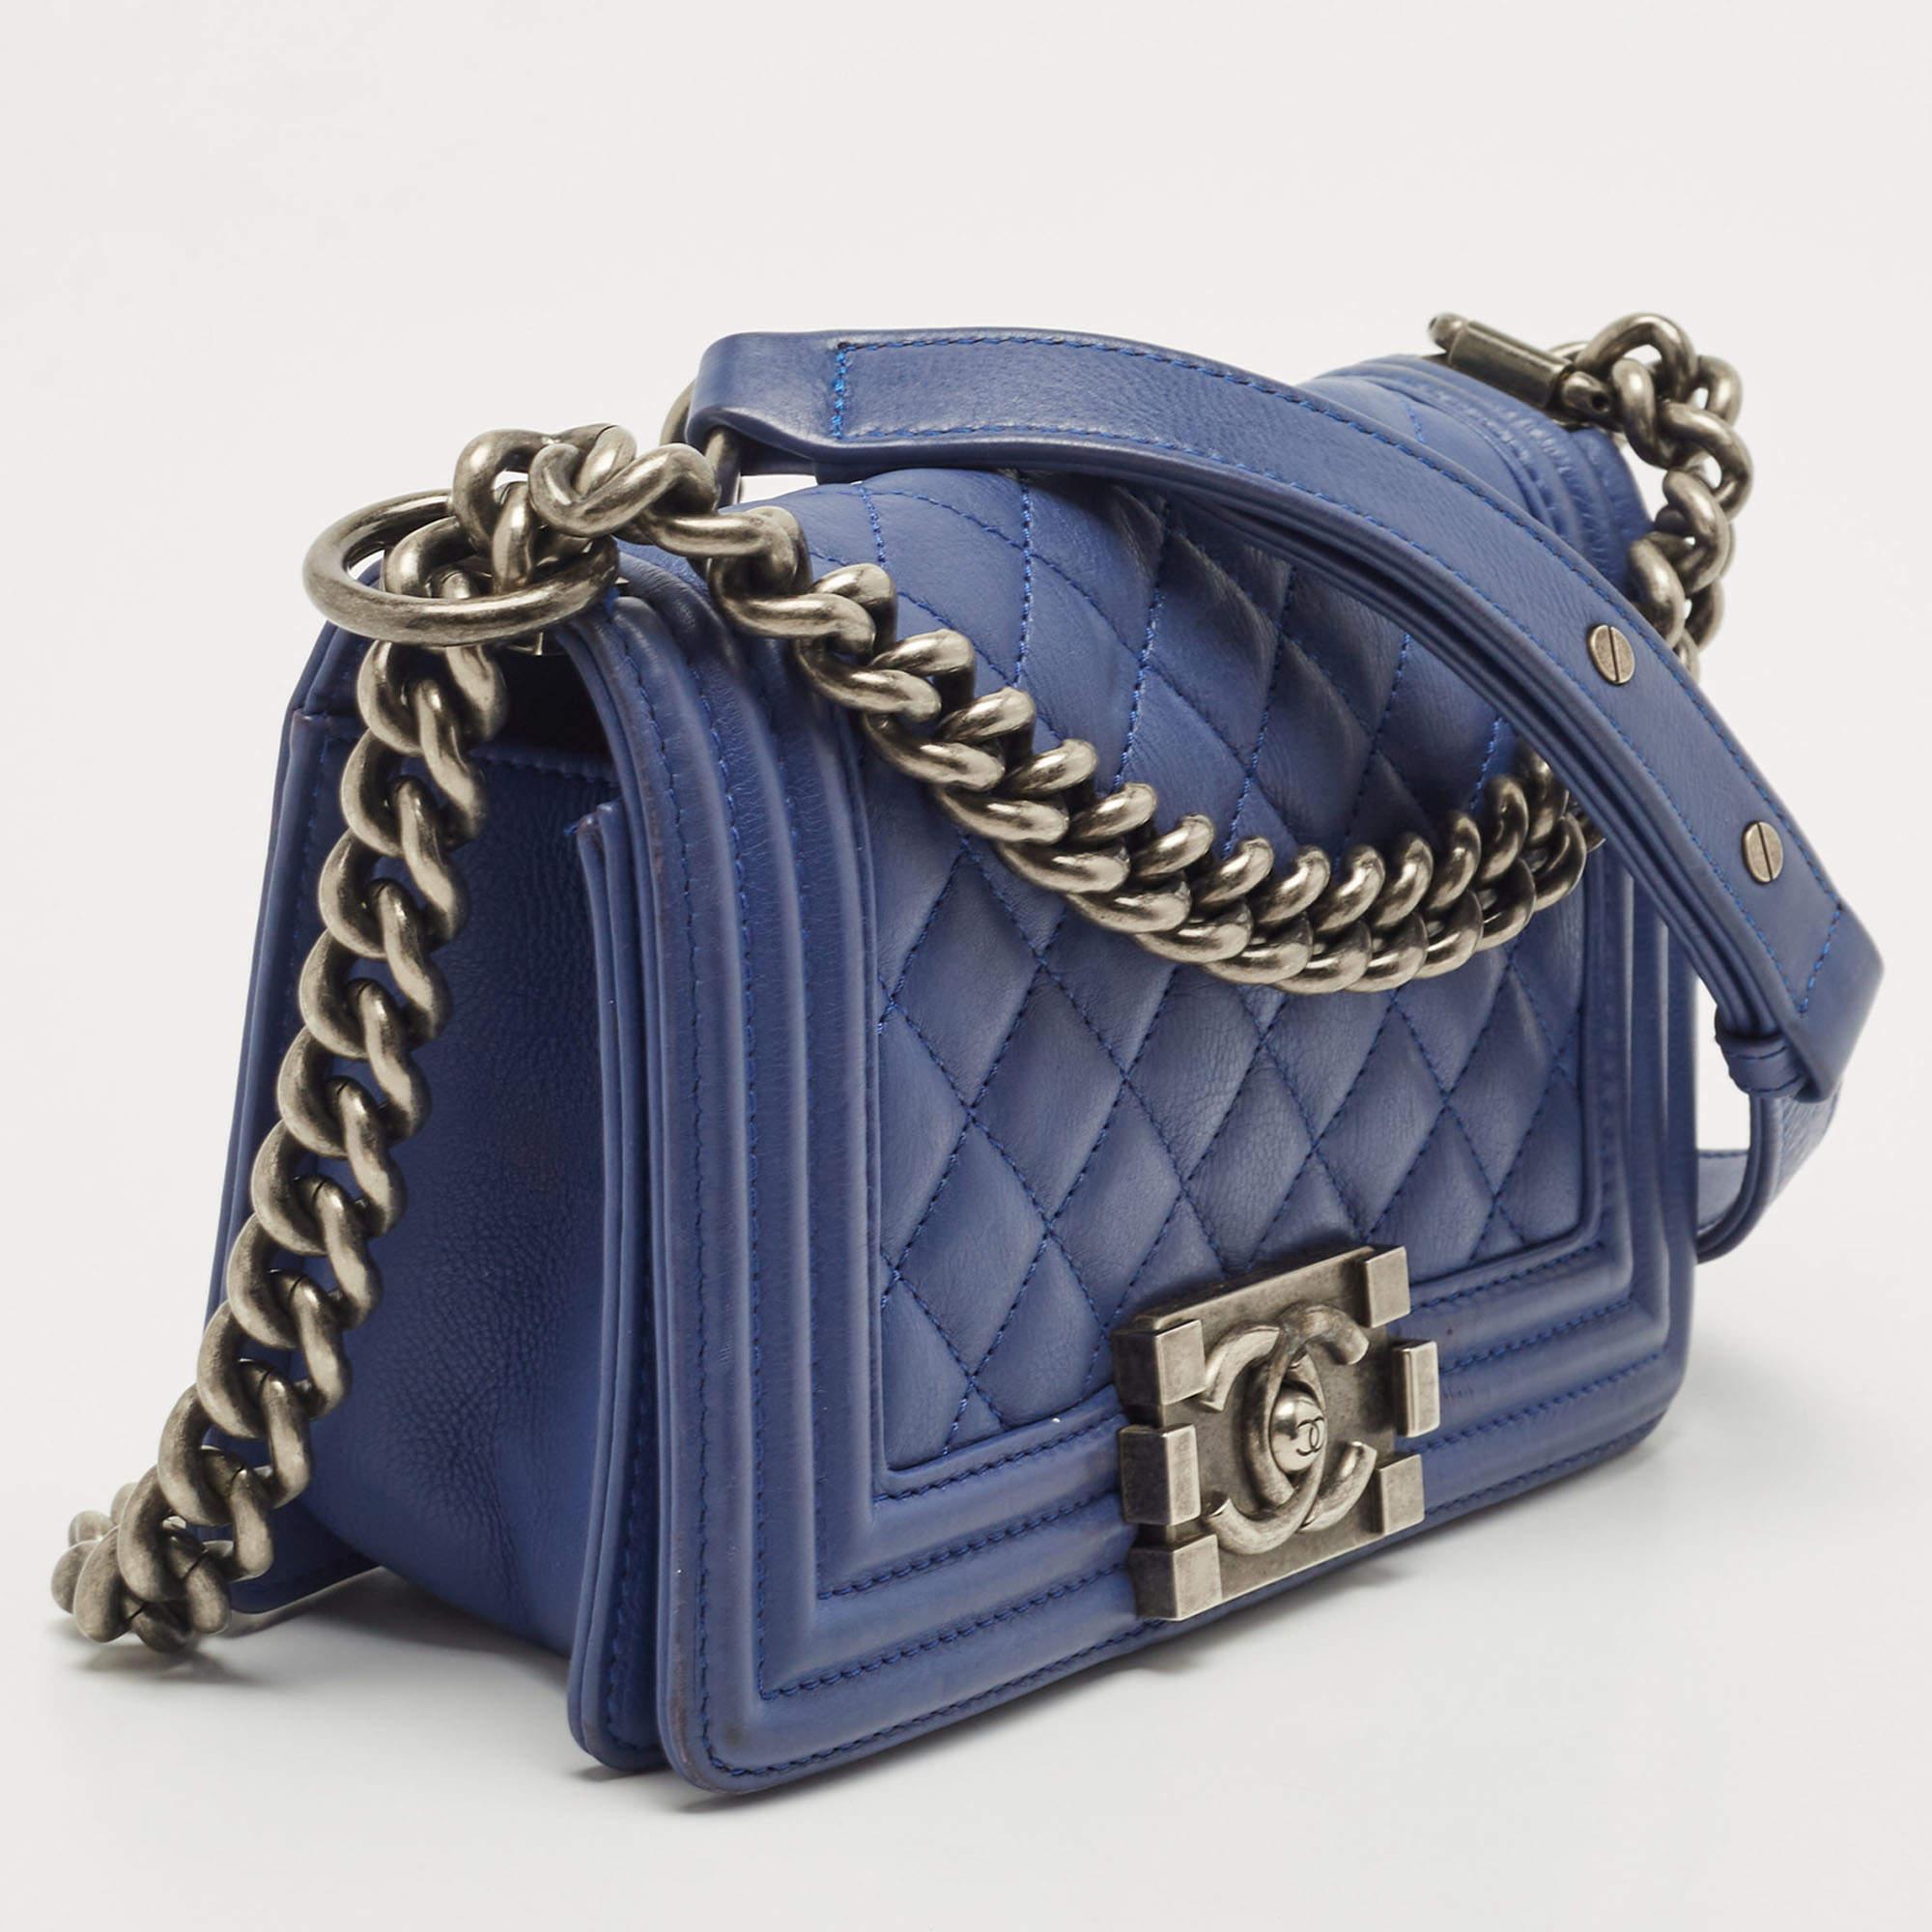 Chanel Blue Quilted Leather Small Boy Flap Bag 2